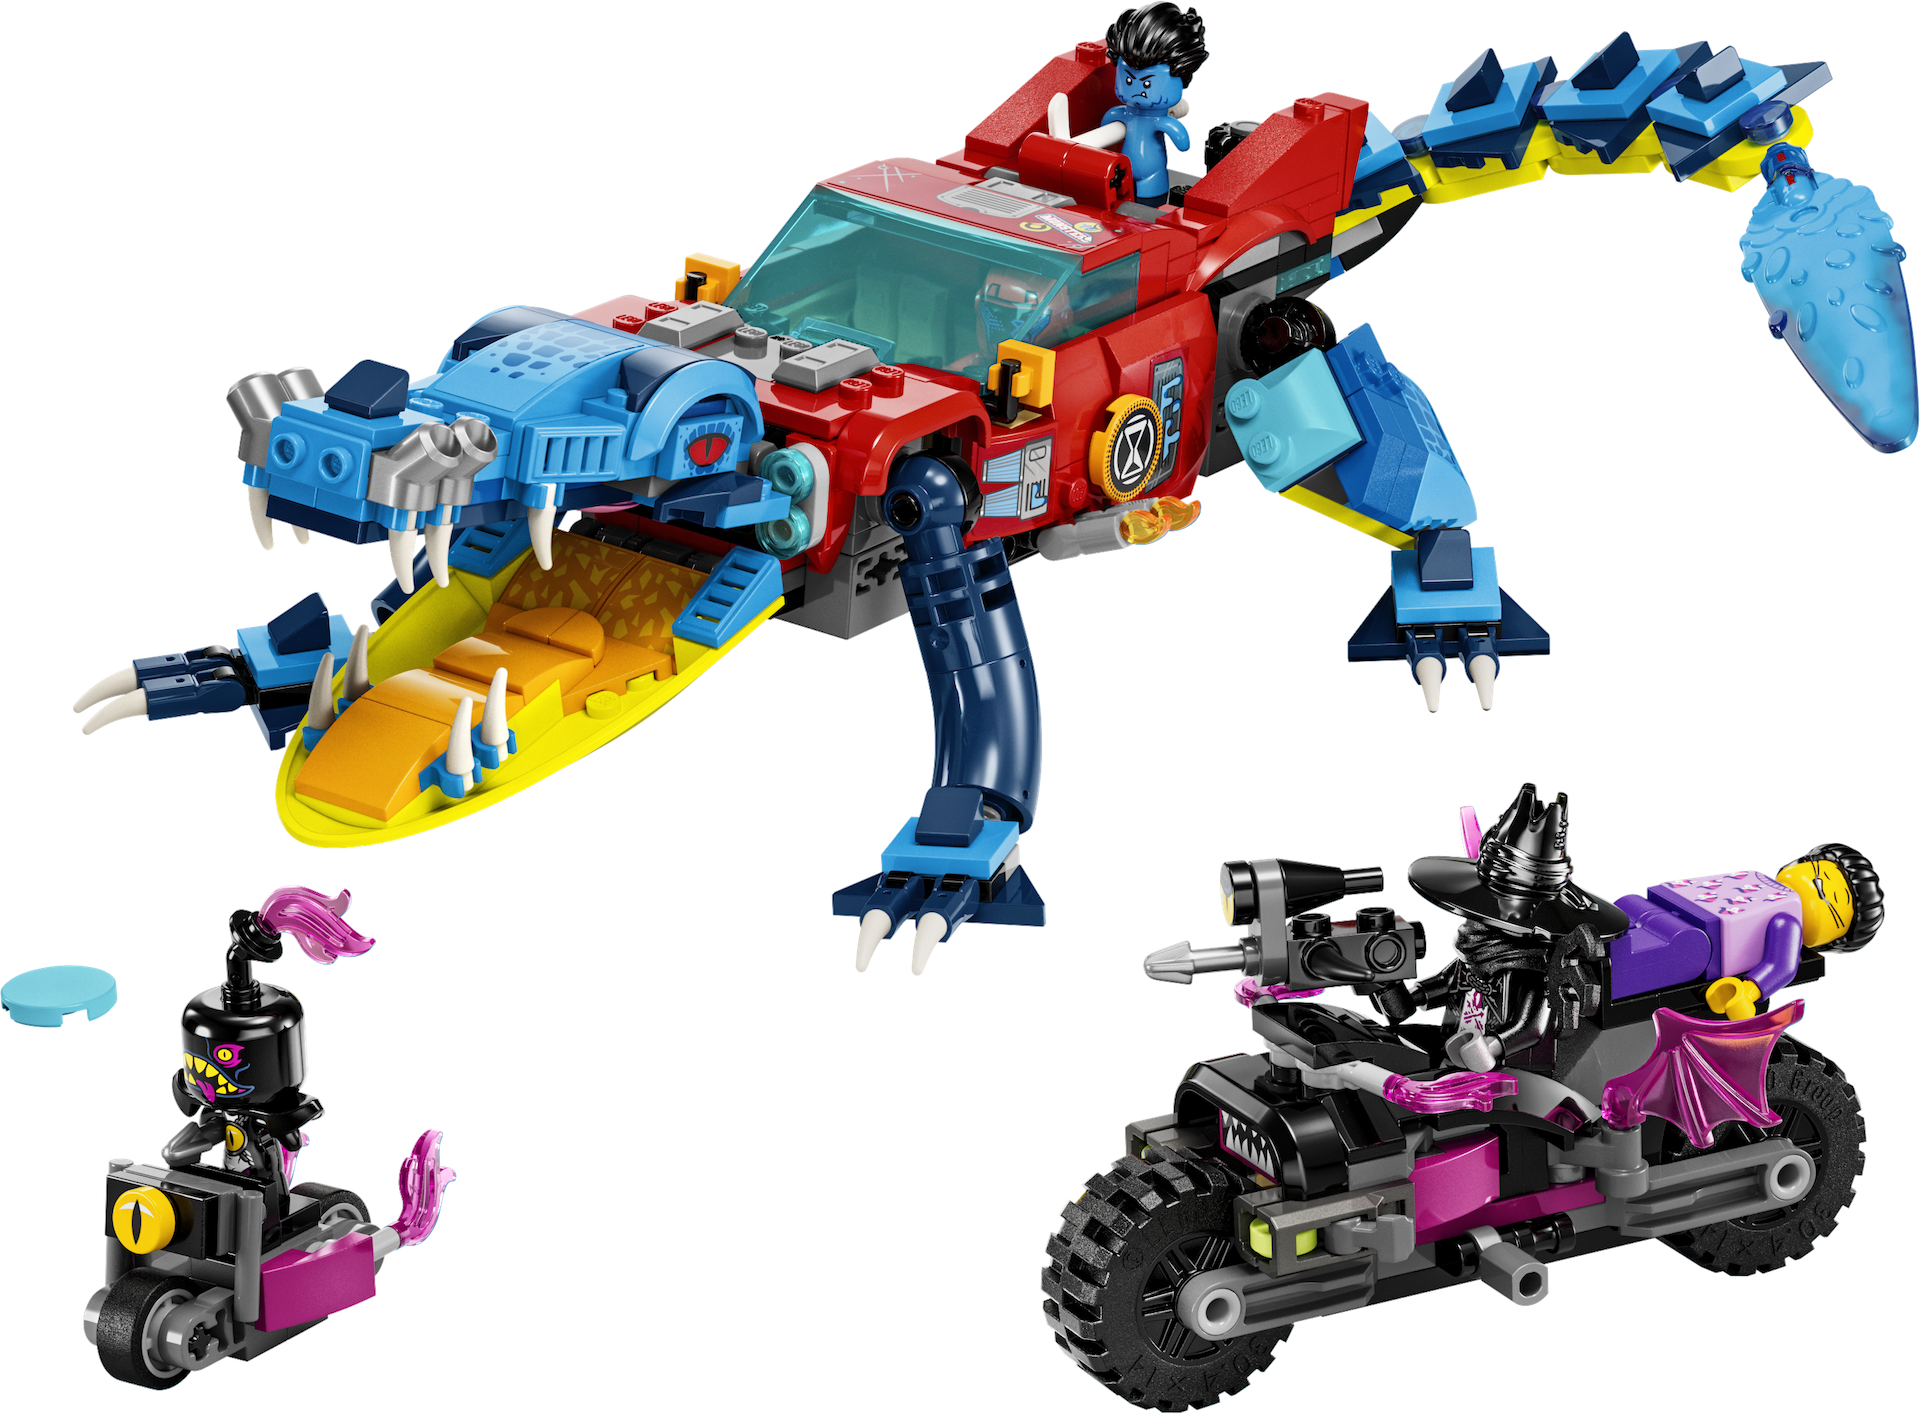 LEGO Dreamzzz officially revealed, with all-new sets coming August 2023 -  Jay's Brick Blog